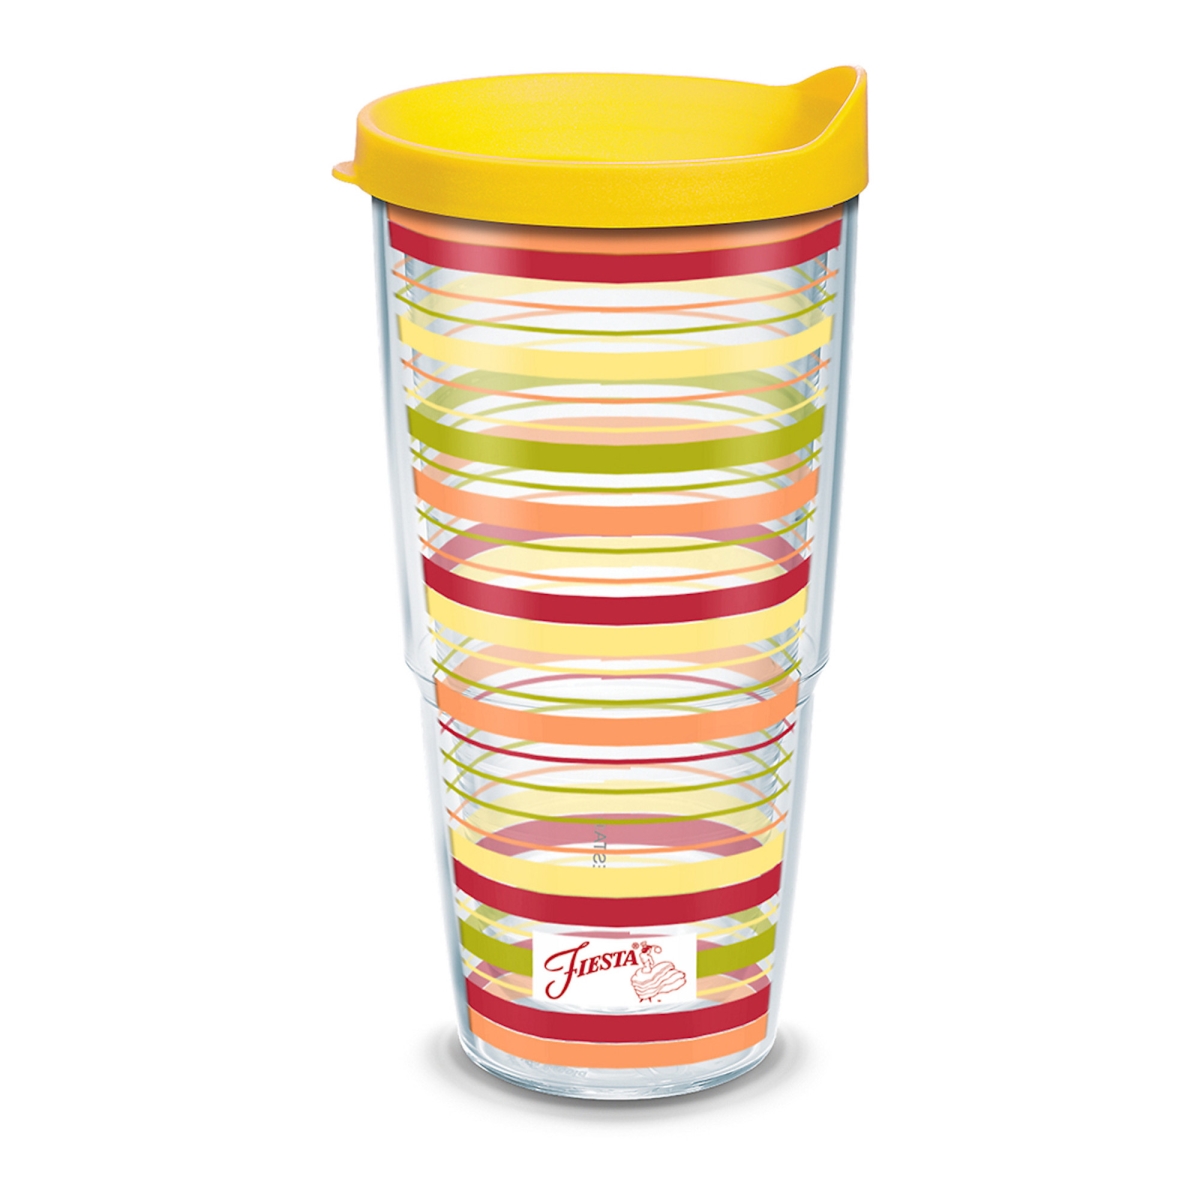 093597365096 Fiesta Sunny Stripes 24 Oz Tumbler With Lid